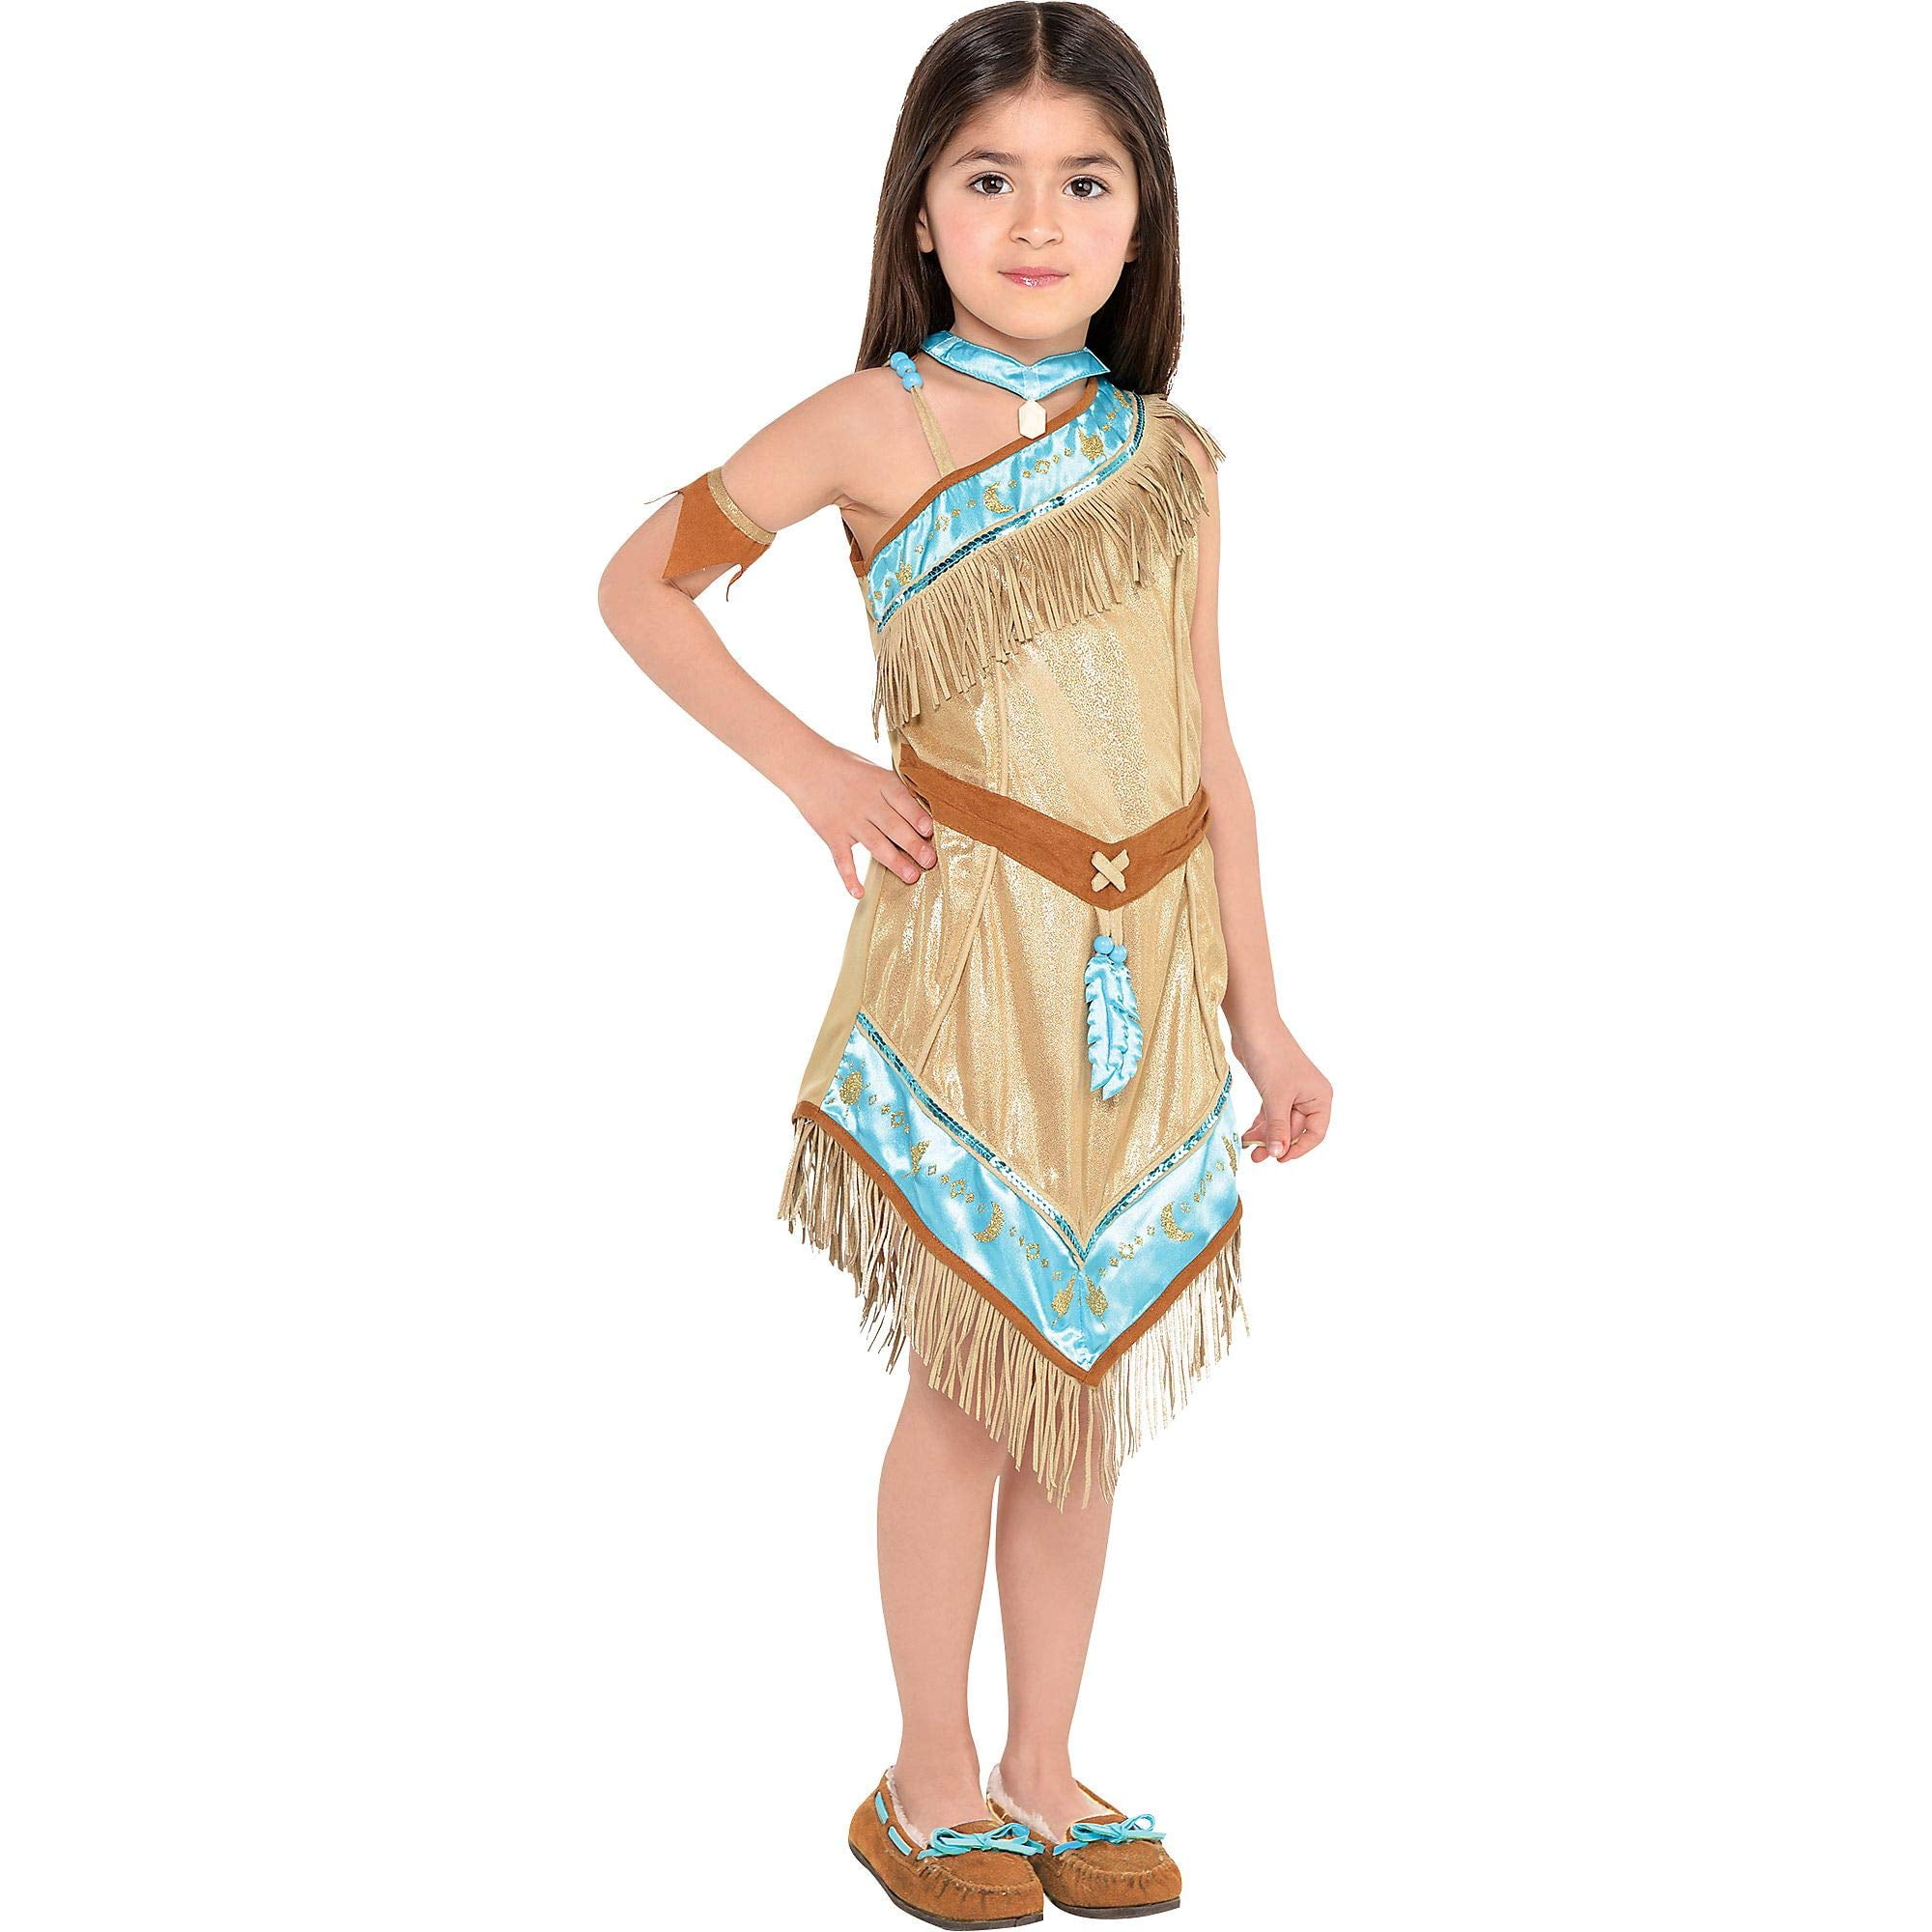 kids pocohontas halloween costumes 2020 Pocahontas Halloween Costume For Toddler Girls 3 4t Includes Accessories Walmart Com Walmart Com kids pocohontas halloween costumes 2020